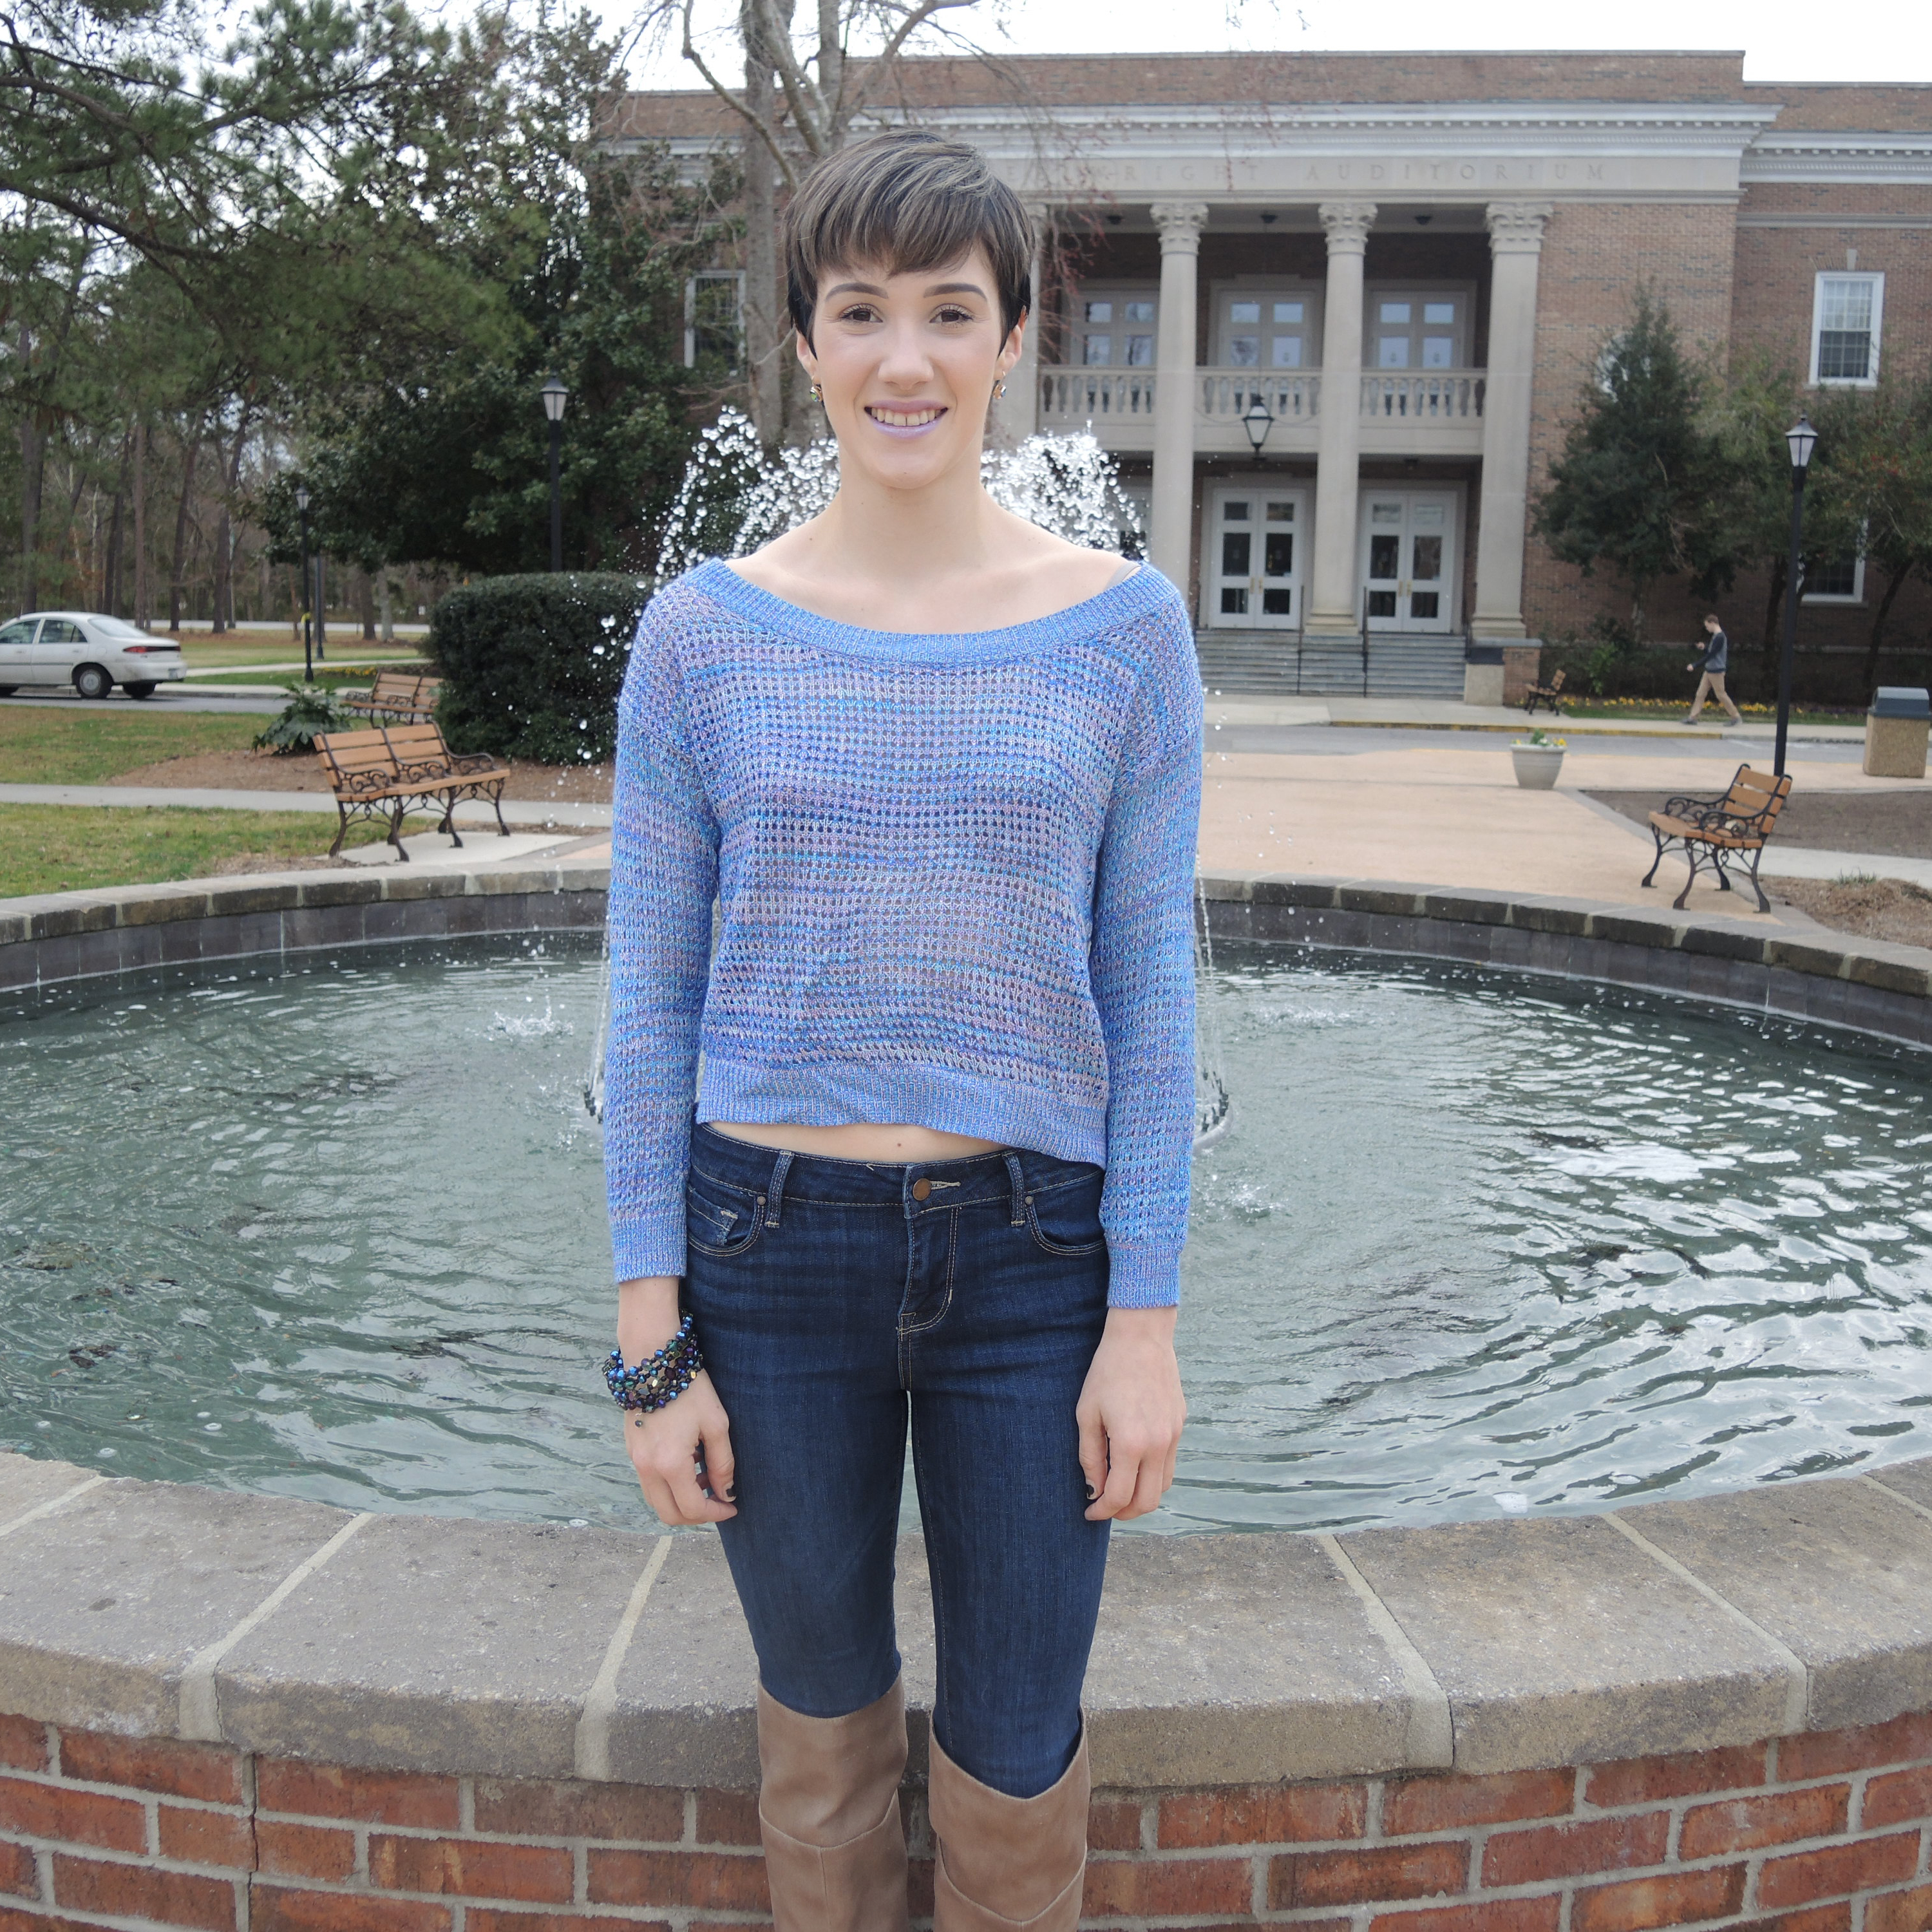 Katie serves as the editor-in-chief for The Chanticleer.